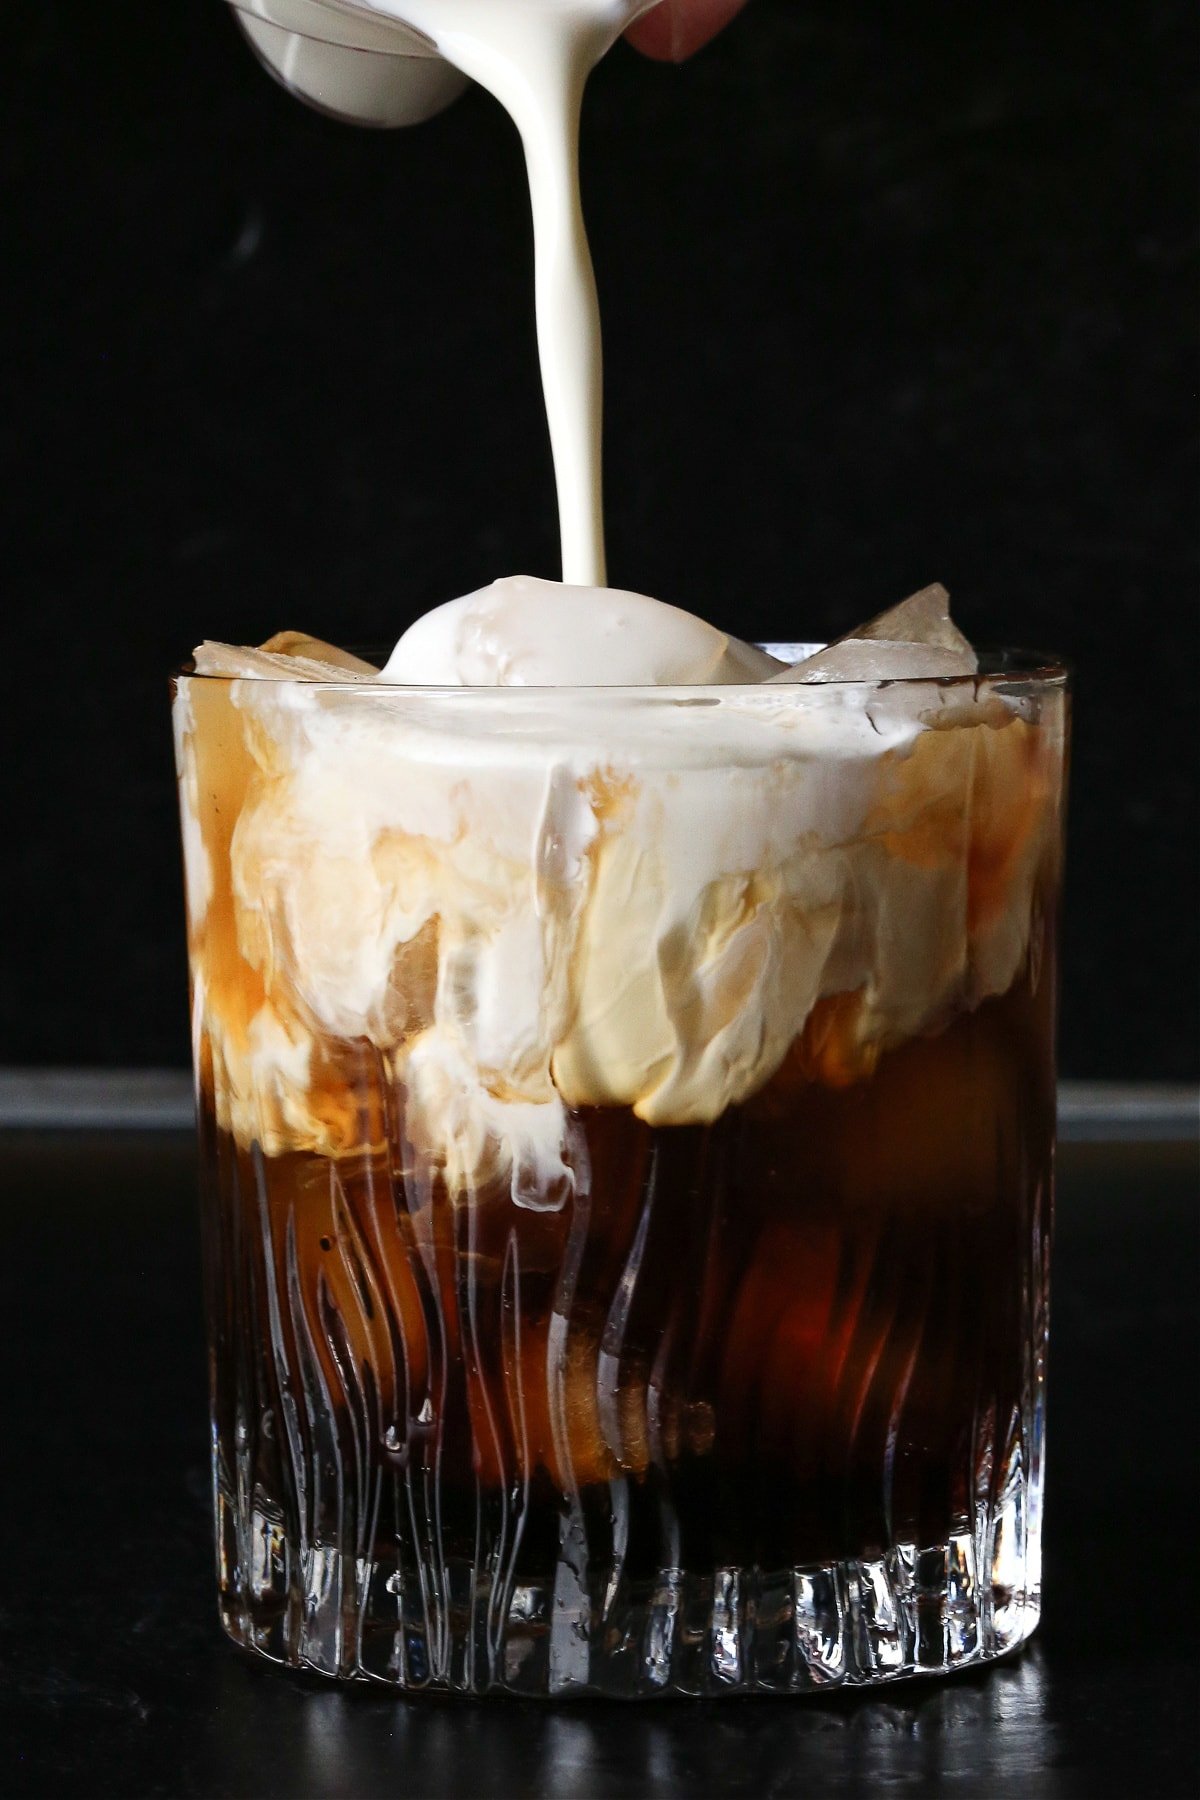 cream being poured into white russian drink